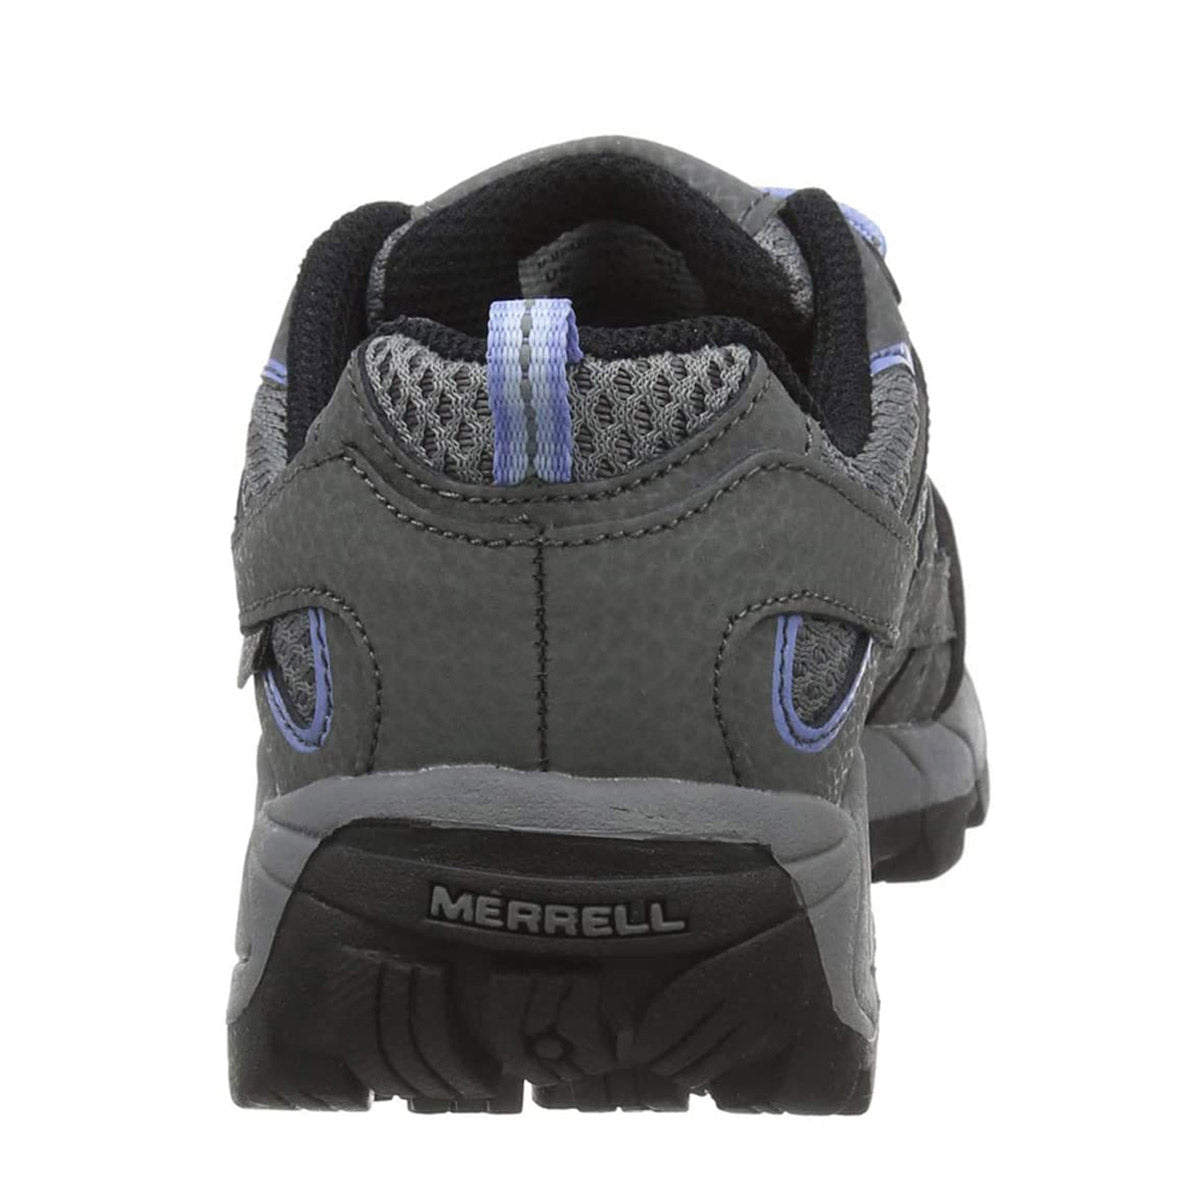 Rear view of a pair of gray Merrell Moab 2 hiking shoes with blue accents and M-Select™ GRIP outsoles.